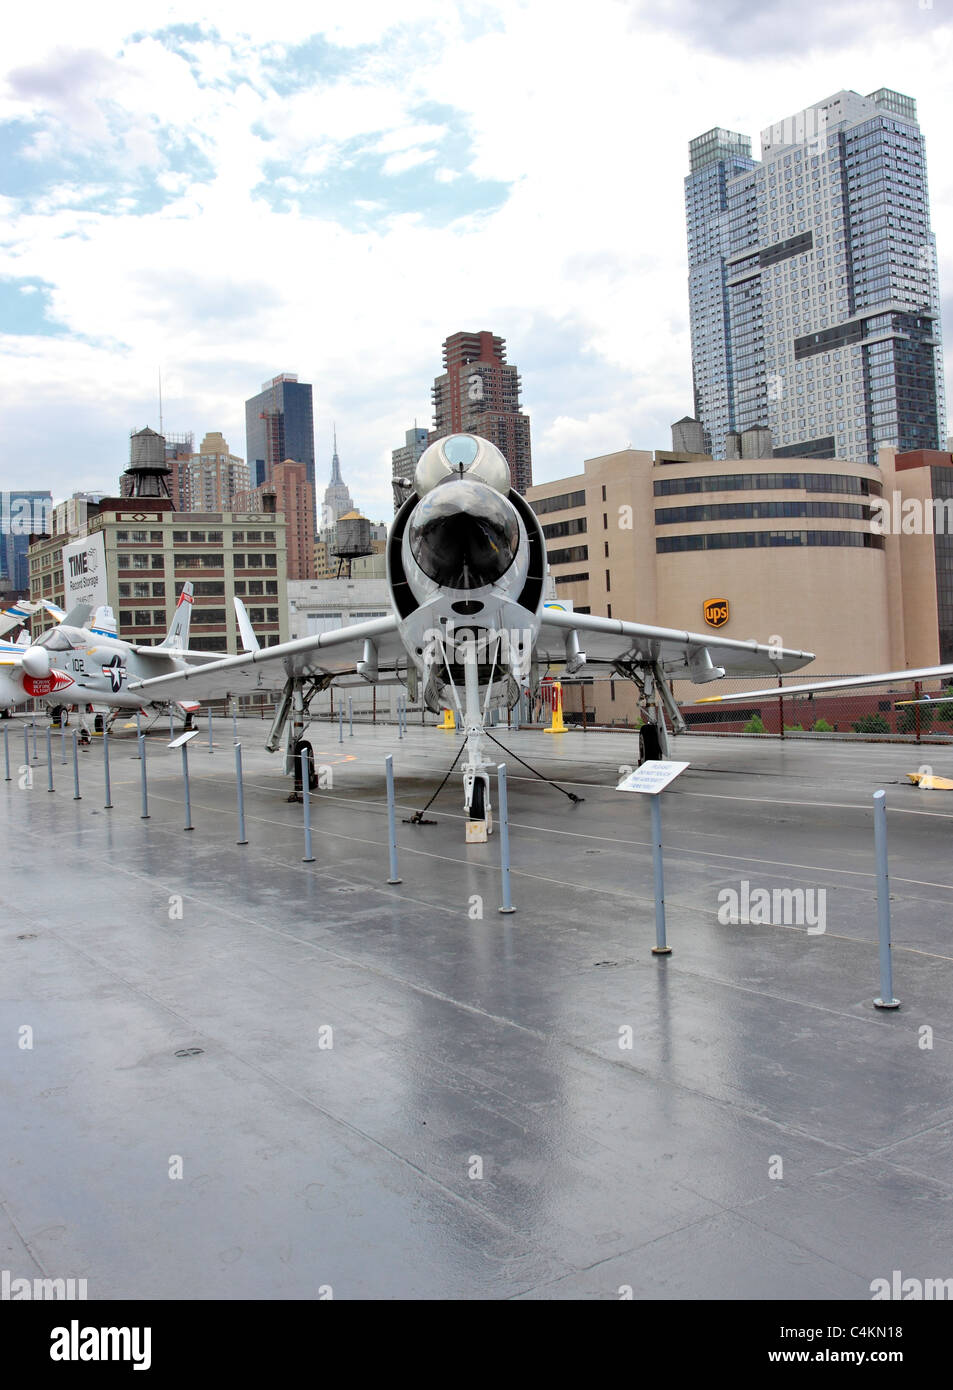 McDonnell f-3 navy fighter jet on flight deck of  USS Intrepid Aircraft Carrier Sea Air and Space Museum Manhattan New York City Stock Photo